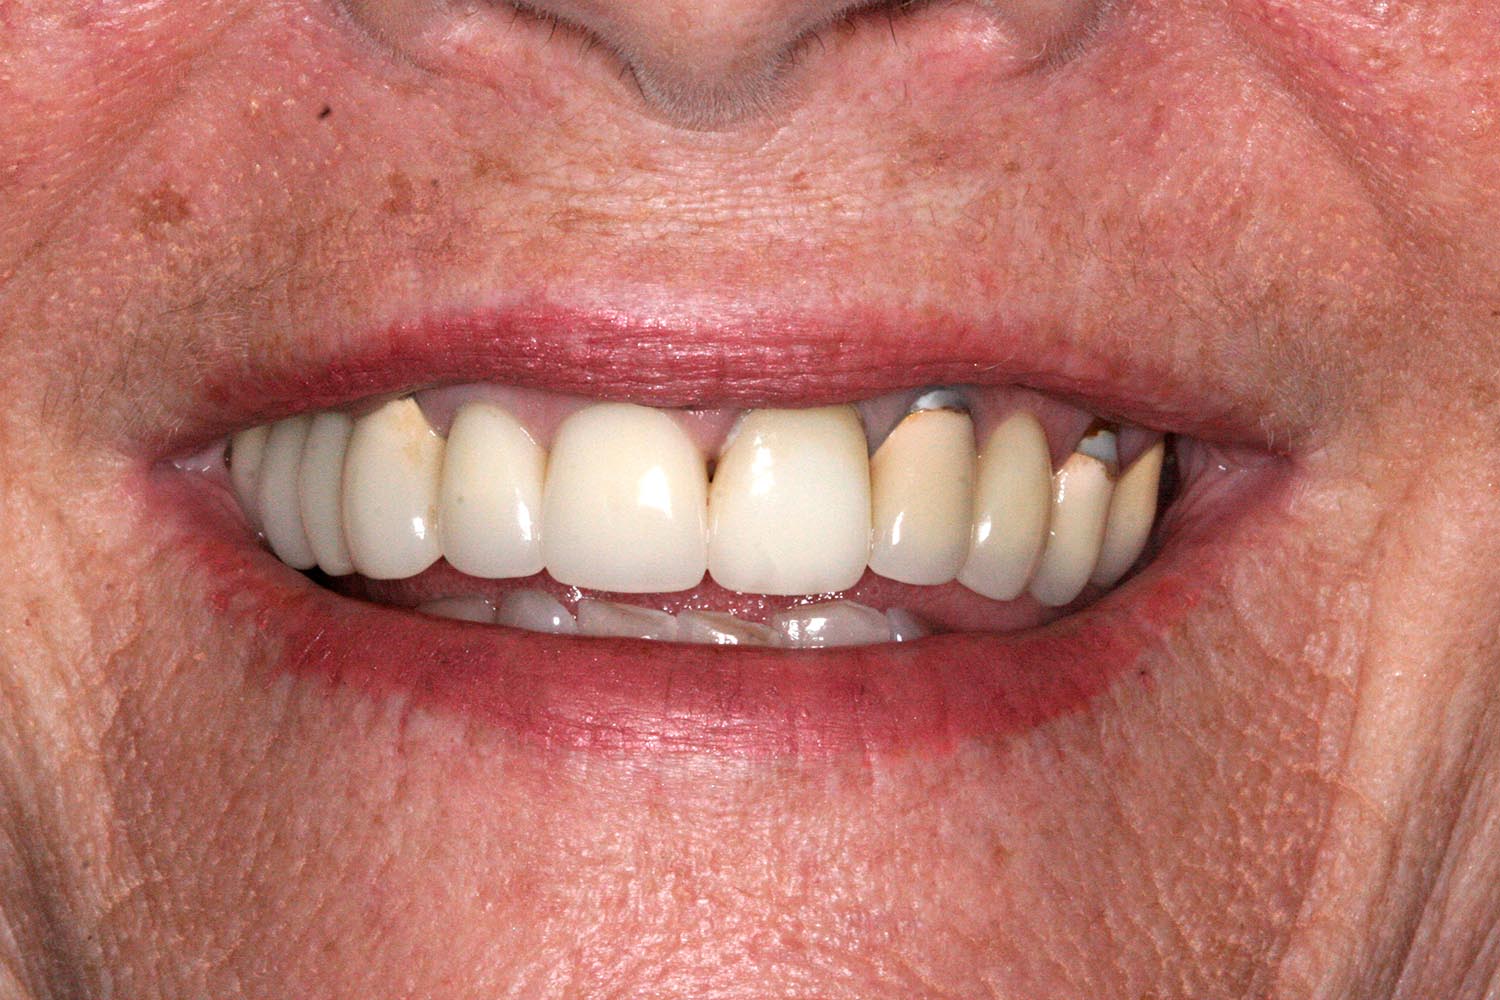 Before adding limited implants and restorations